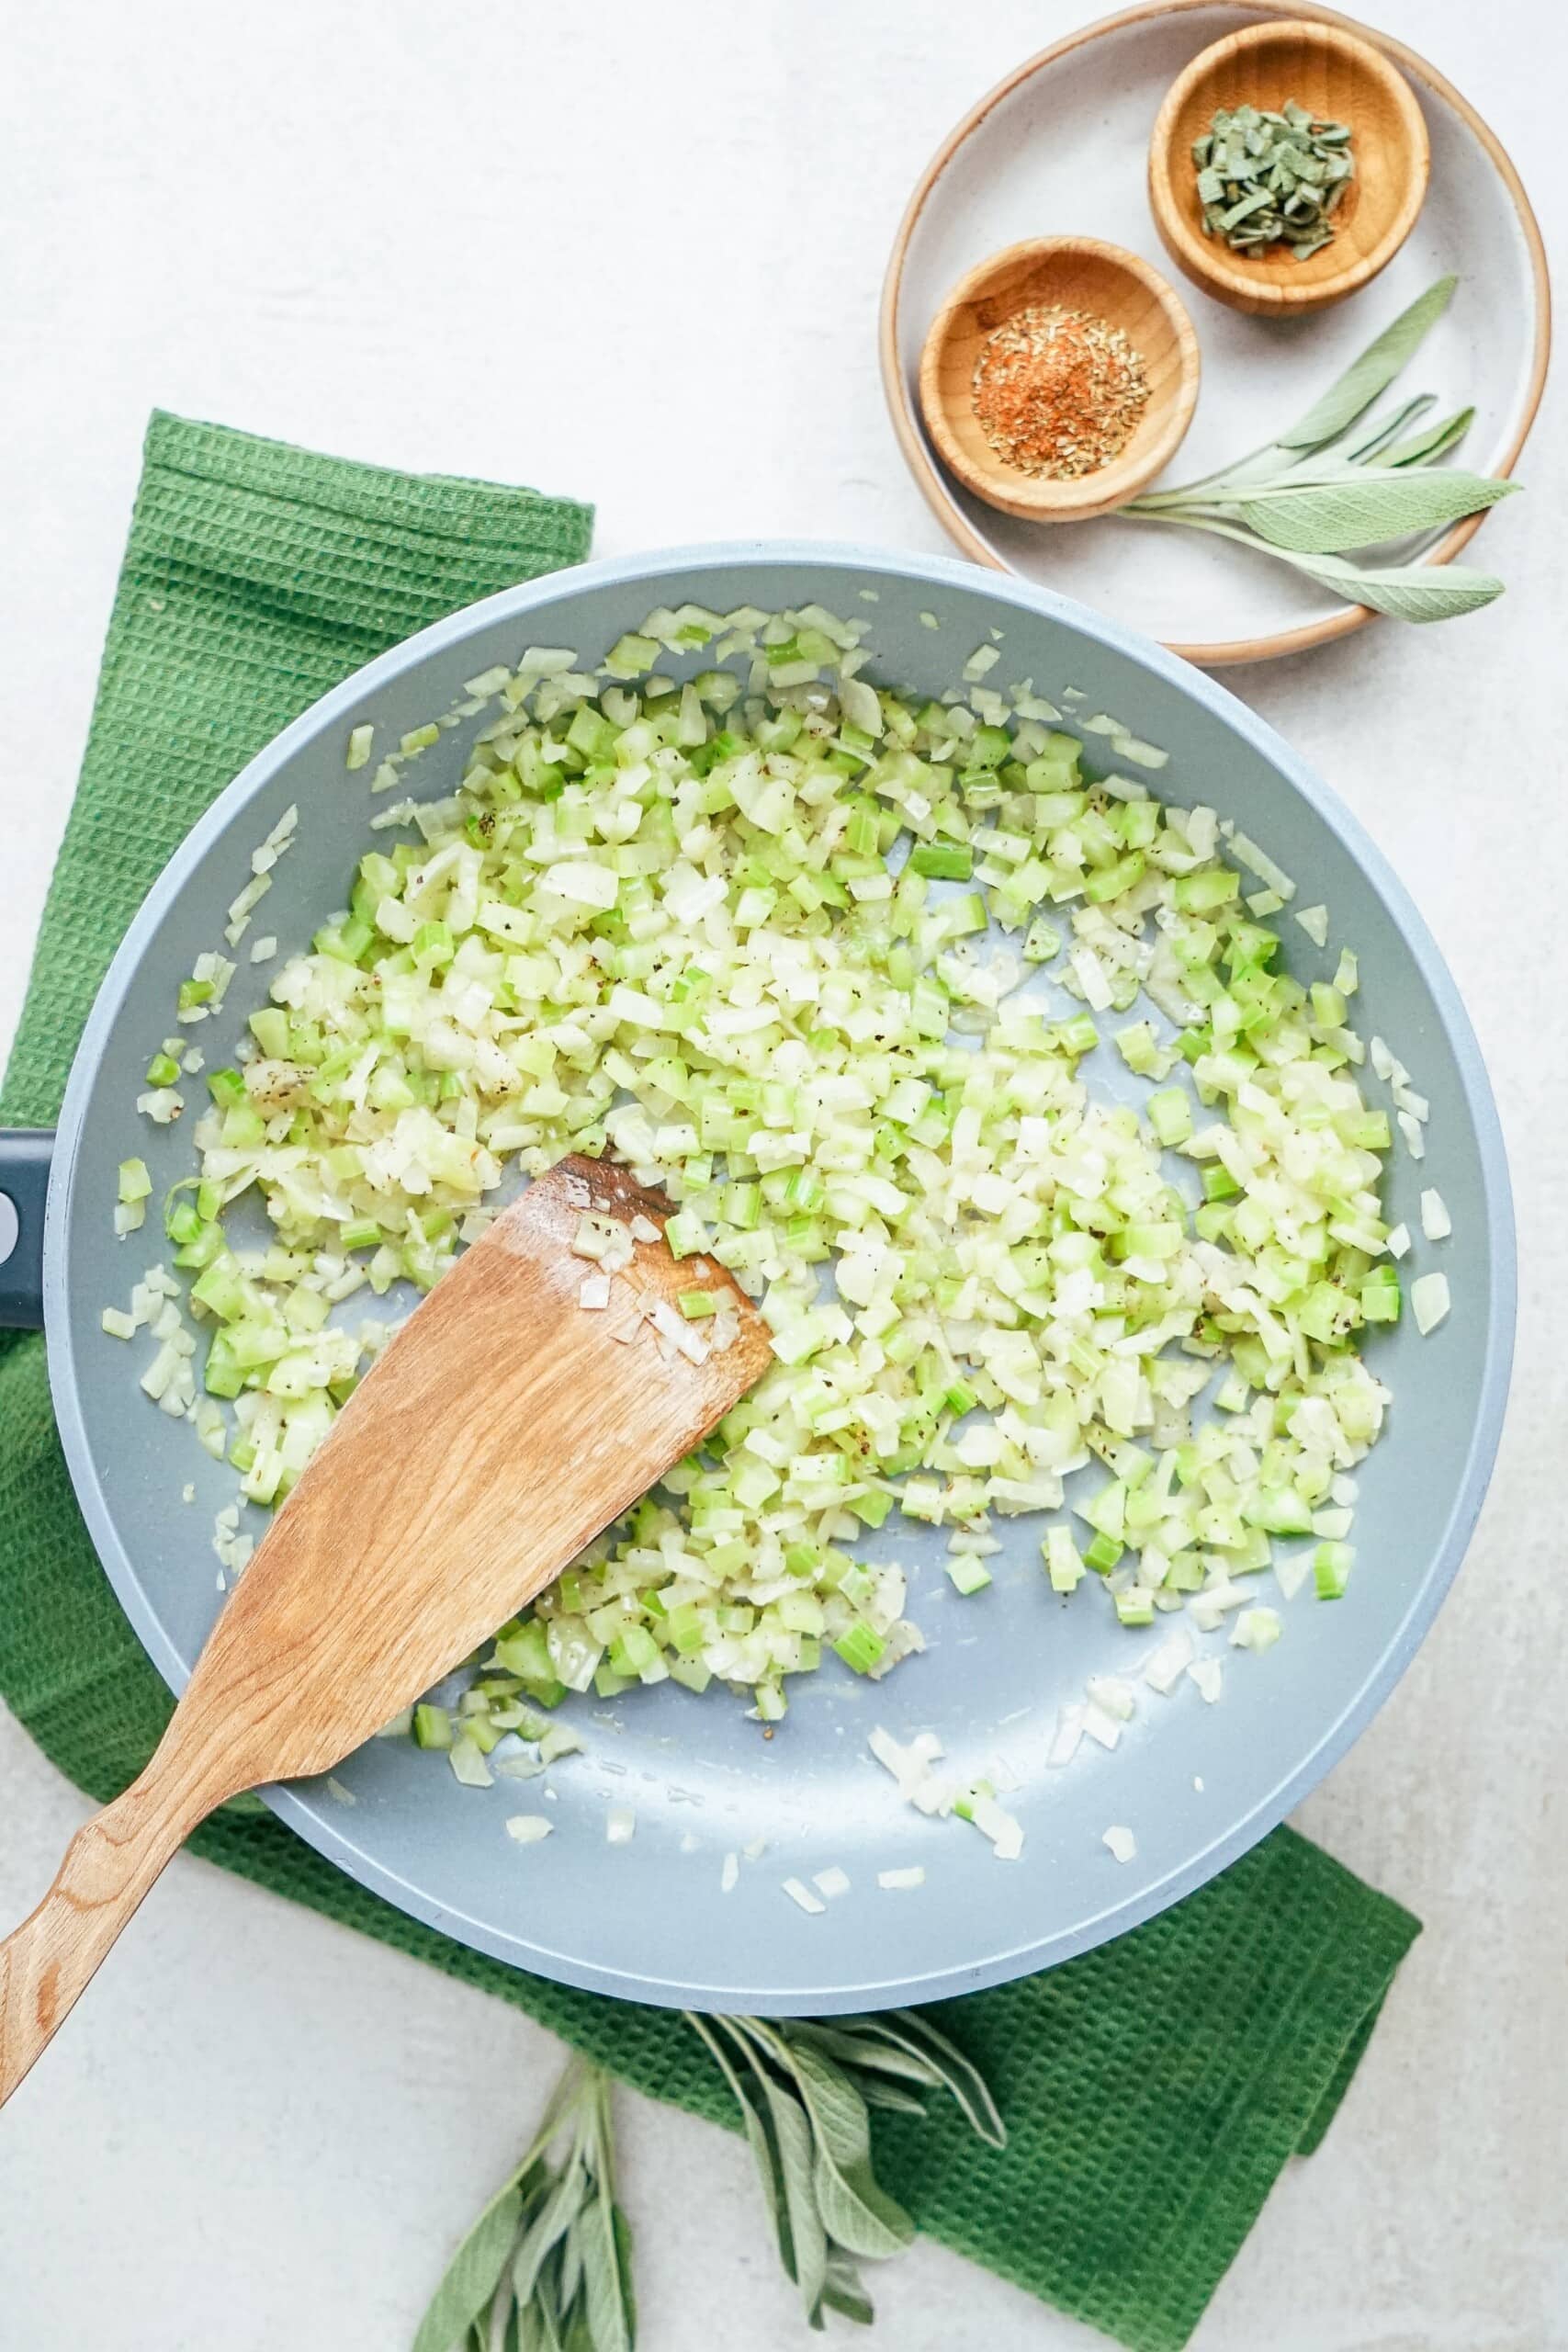 sautéed onions and celery in a skillet with wooden spatula